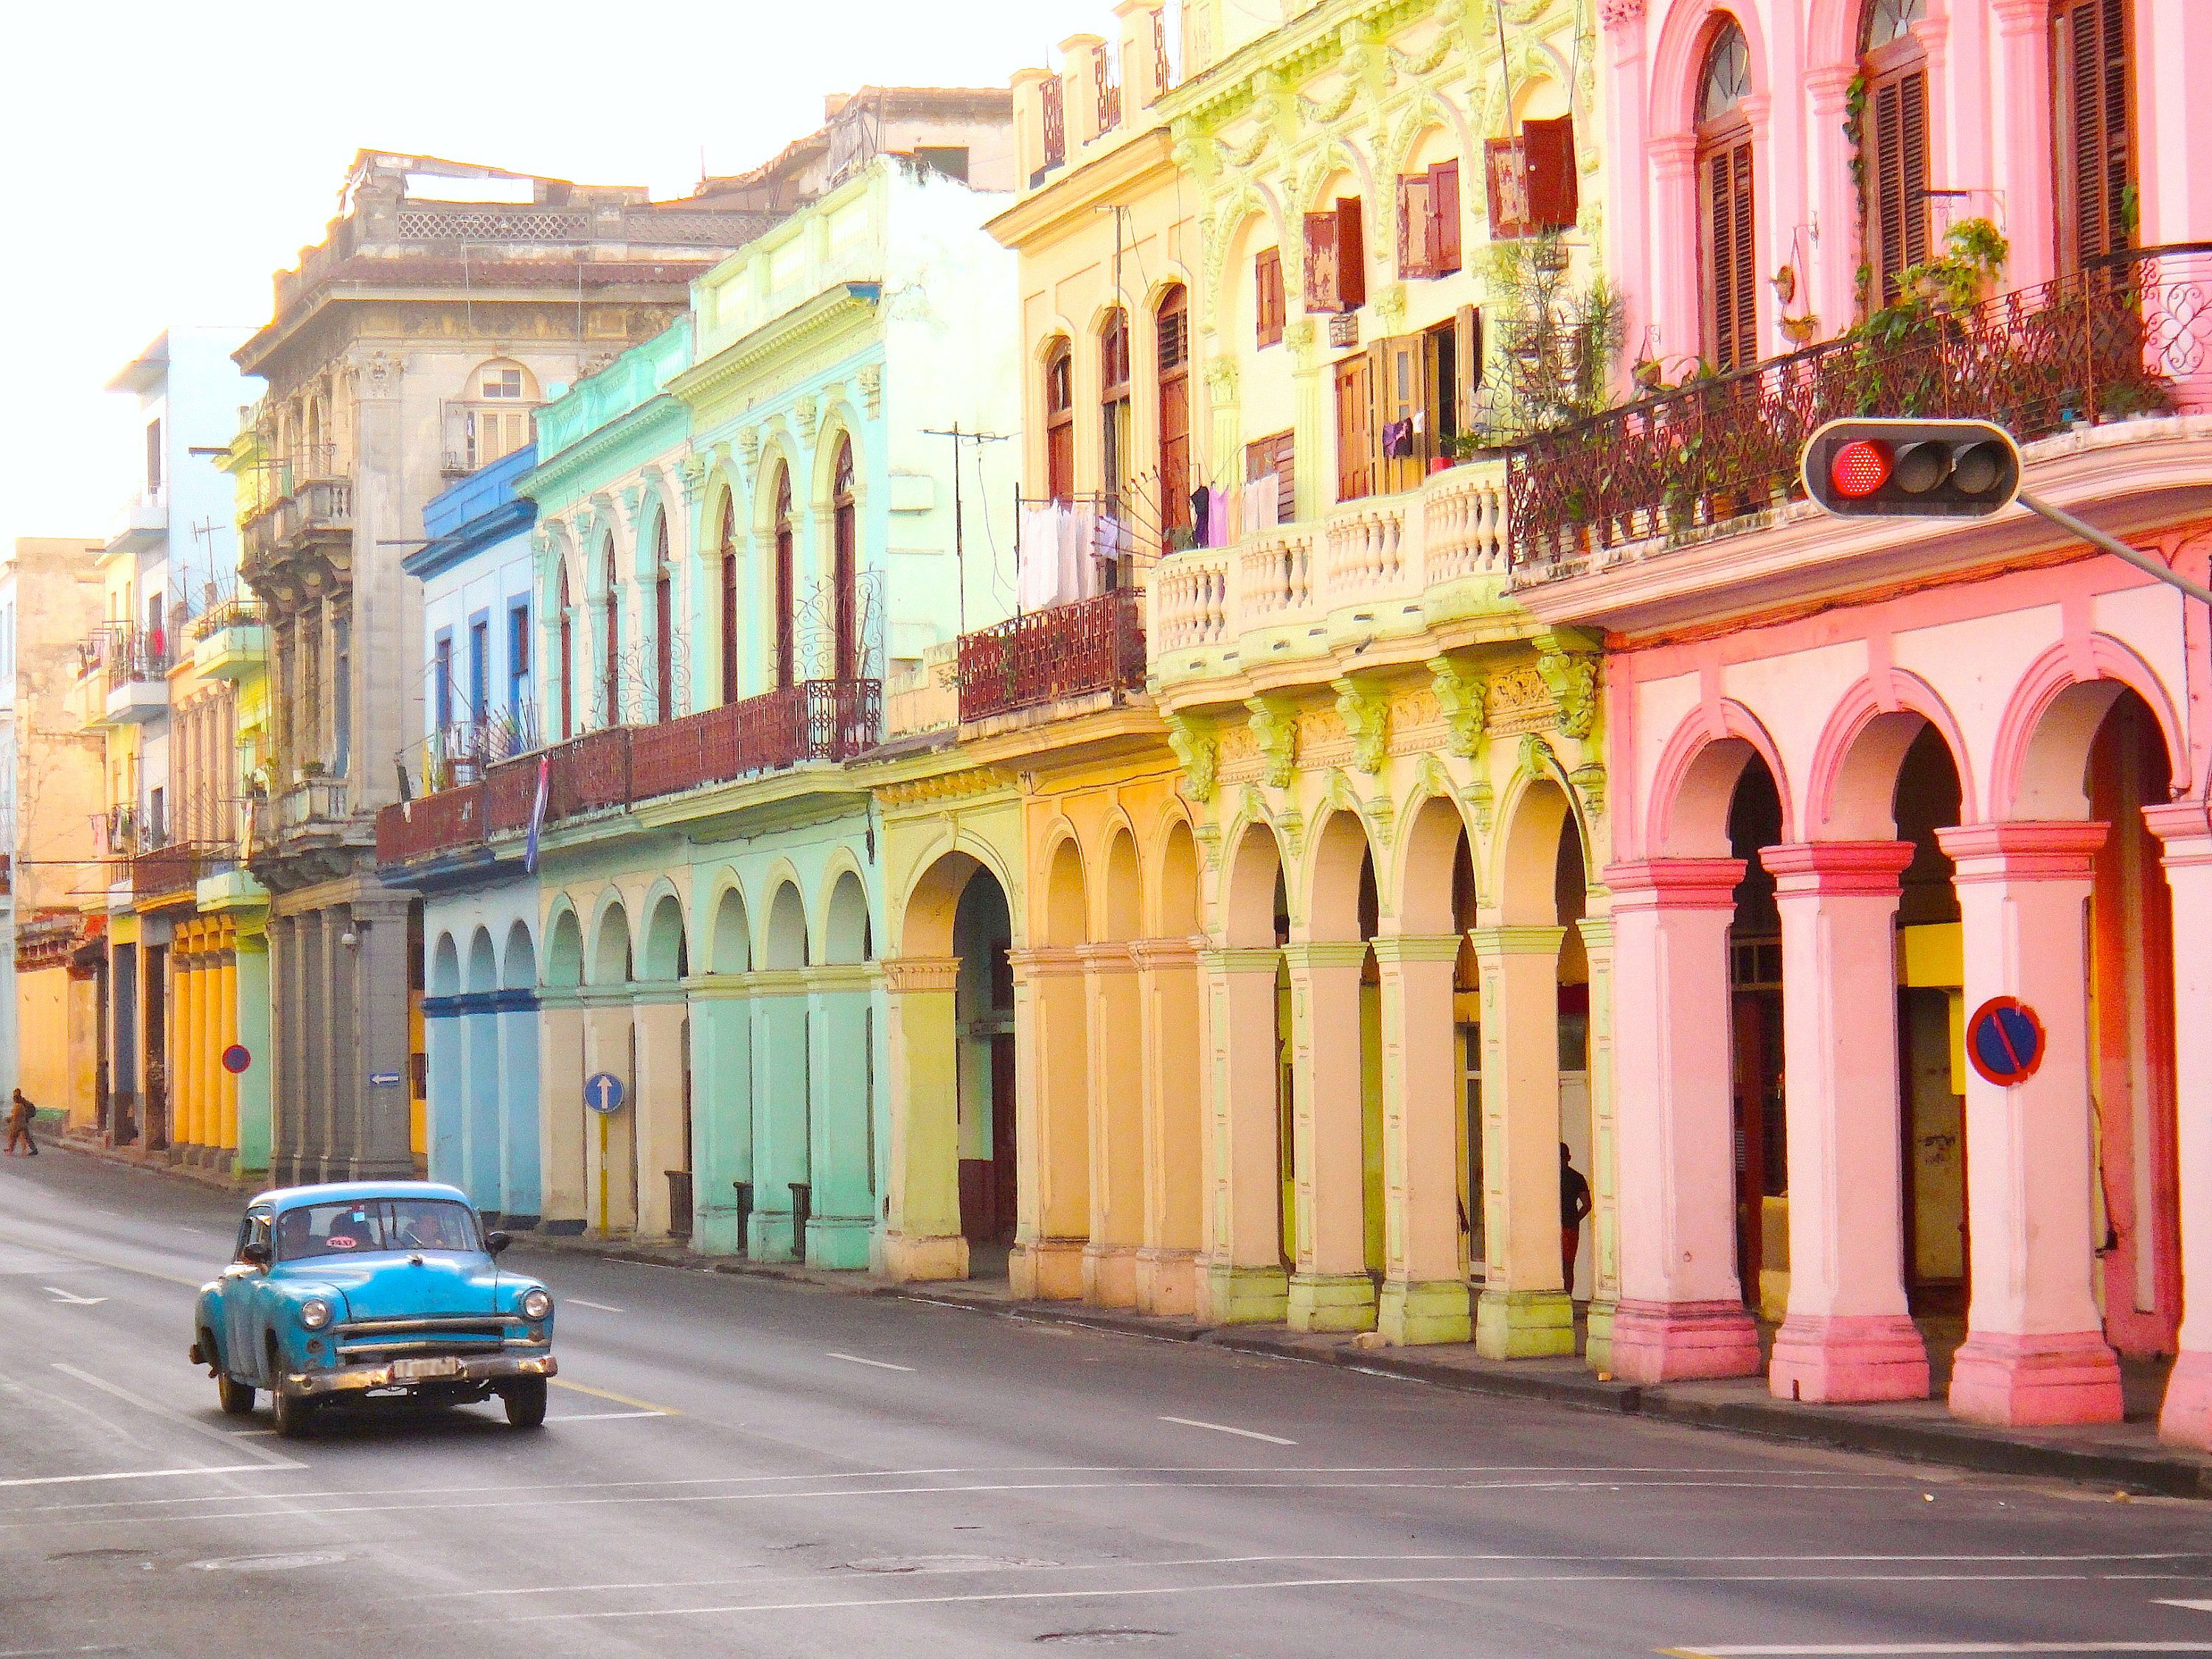 Blue car infront of colourful buildings